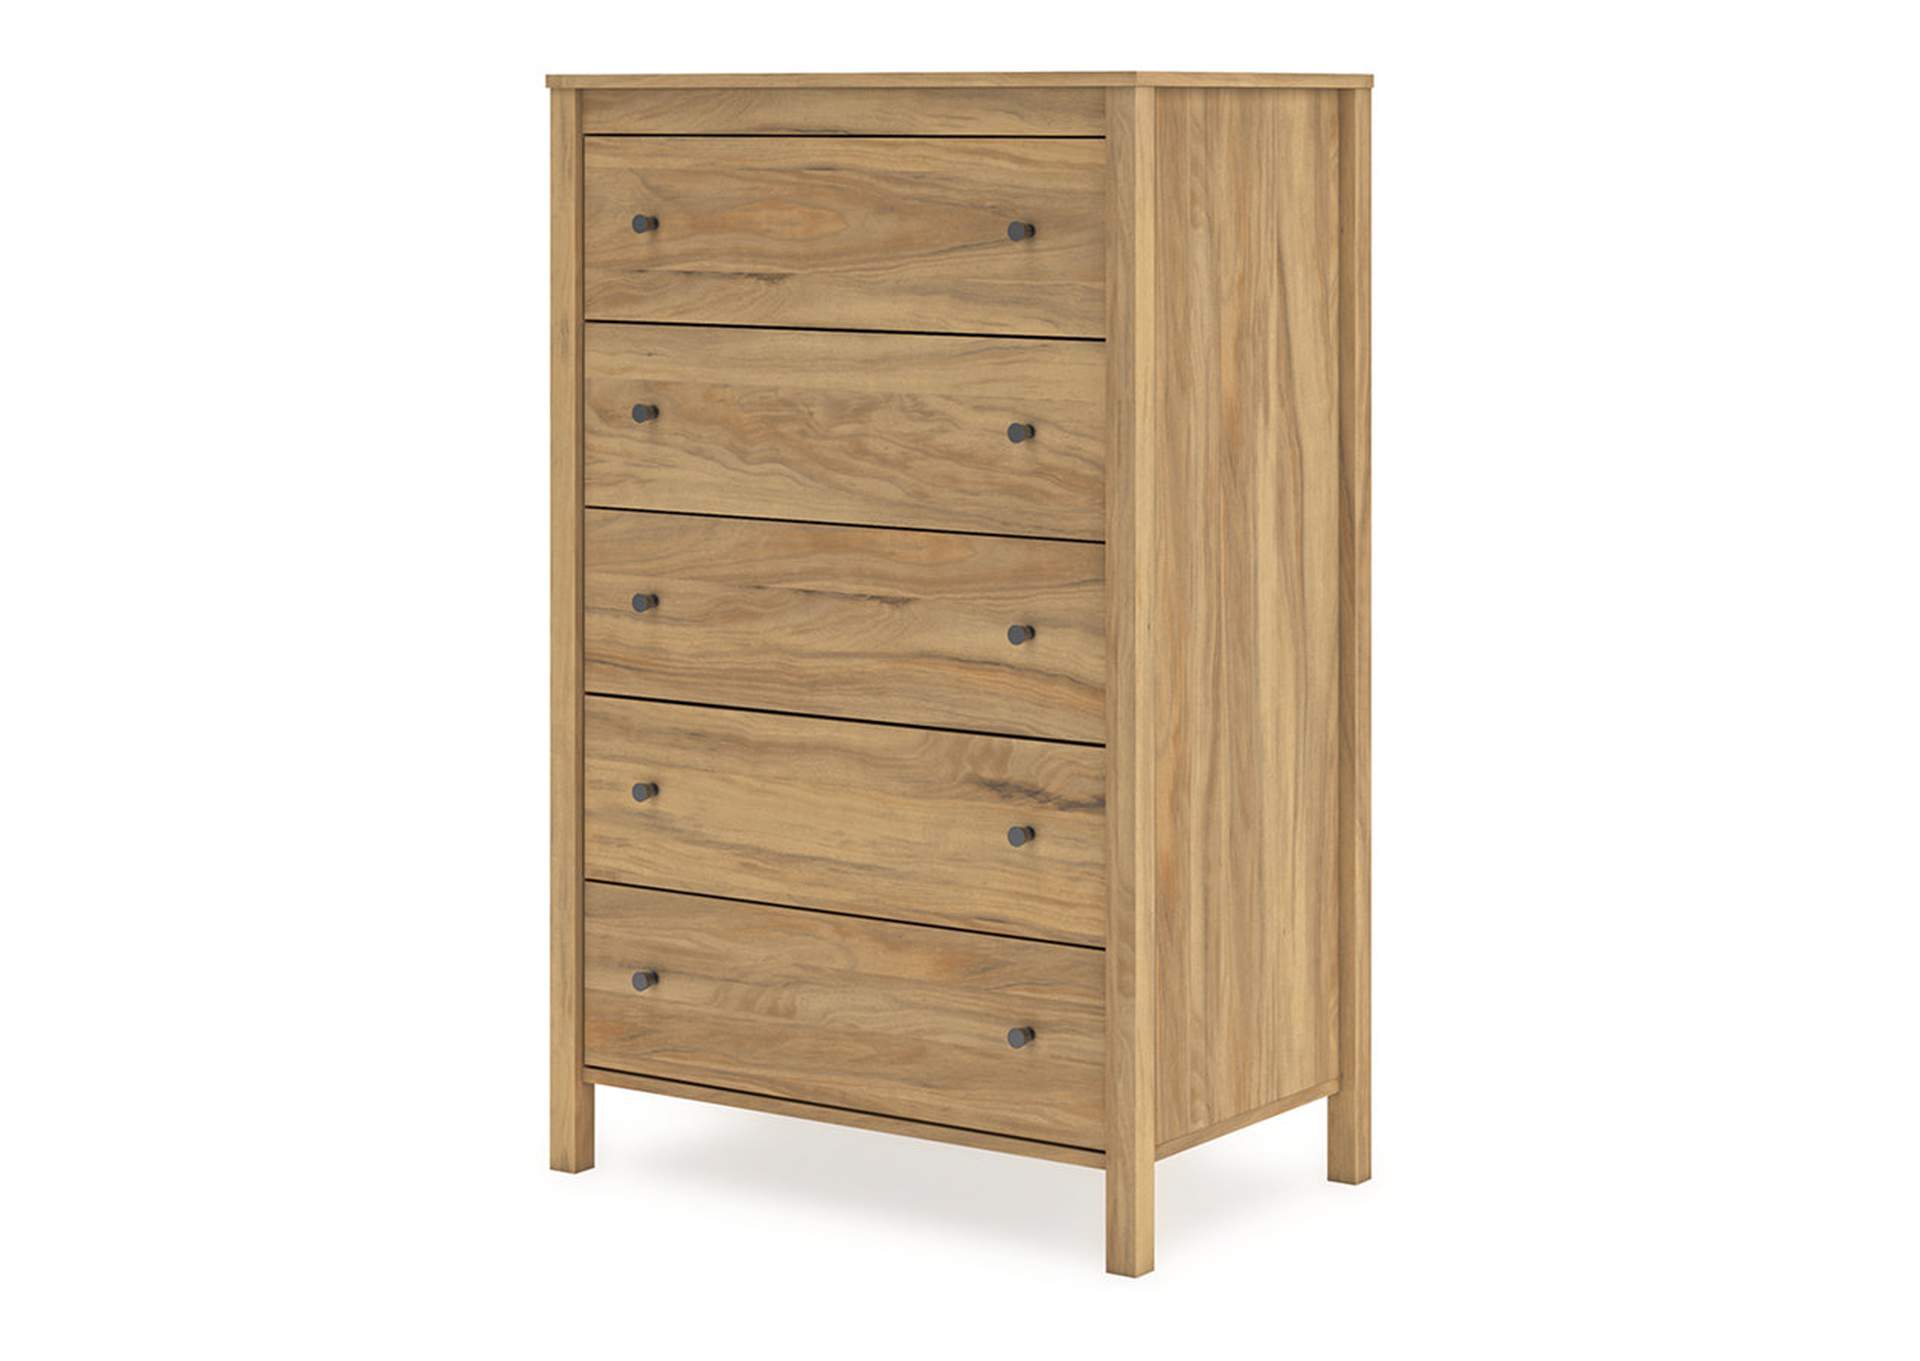 Bermacy Chest of Drawers,Signature Design By Ashley